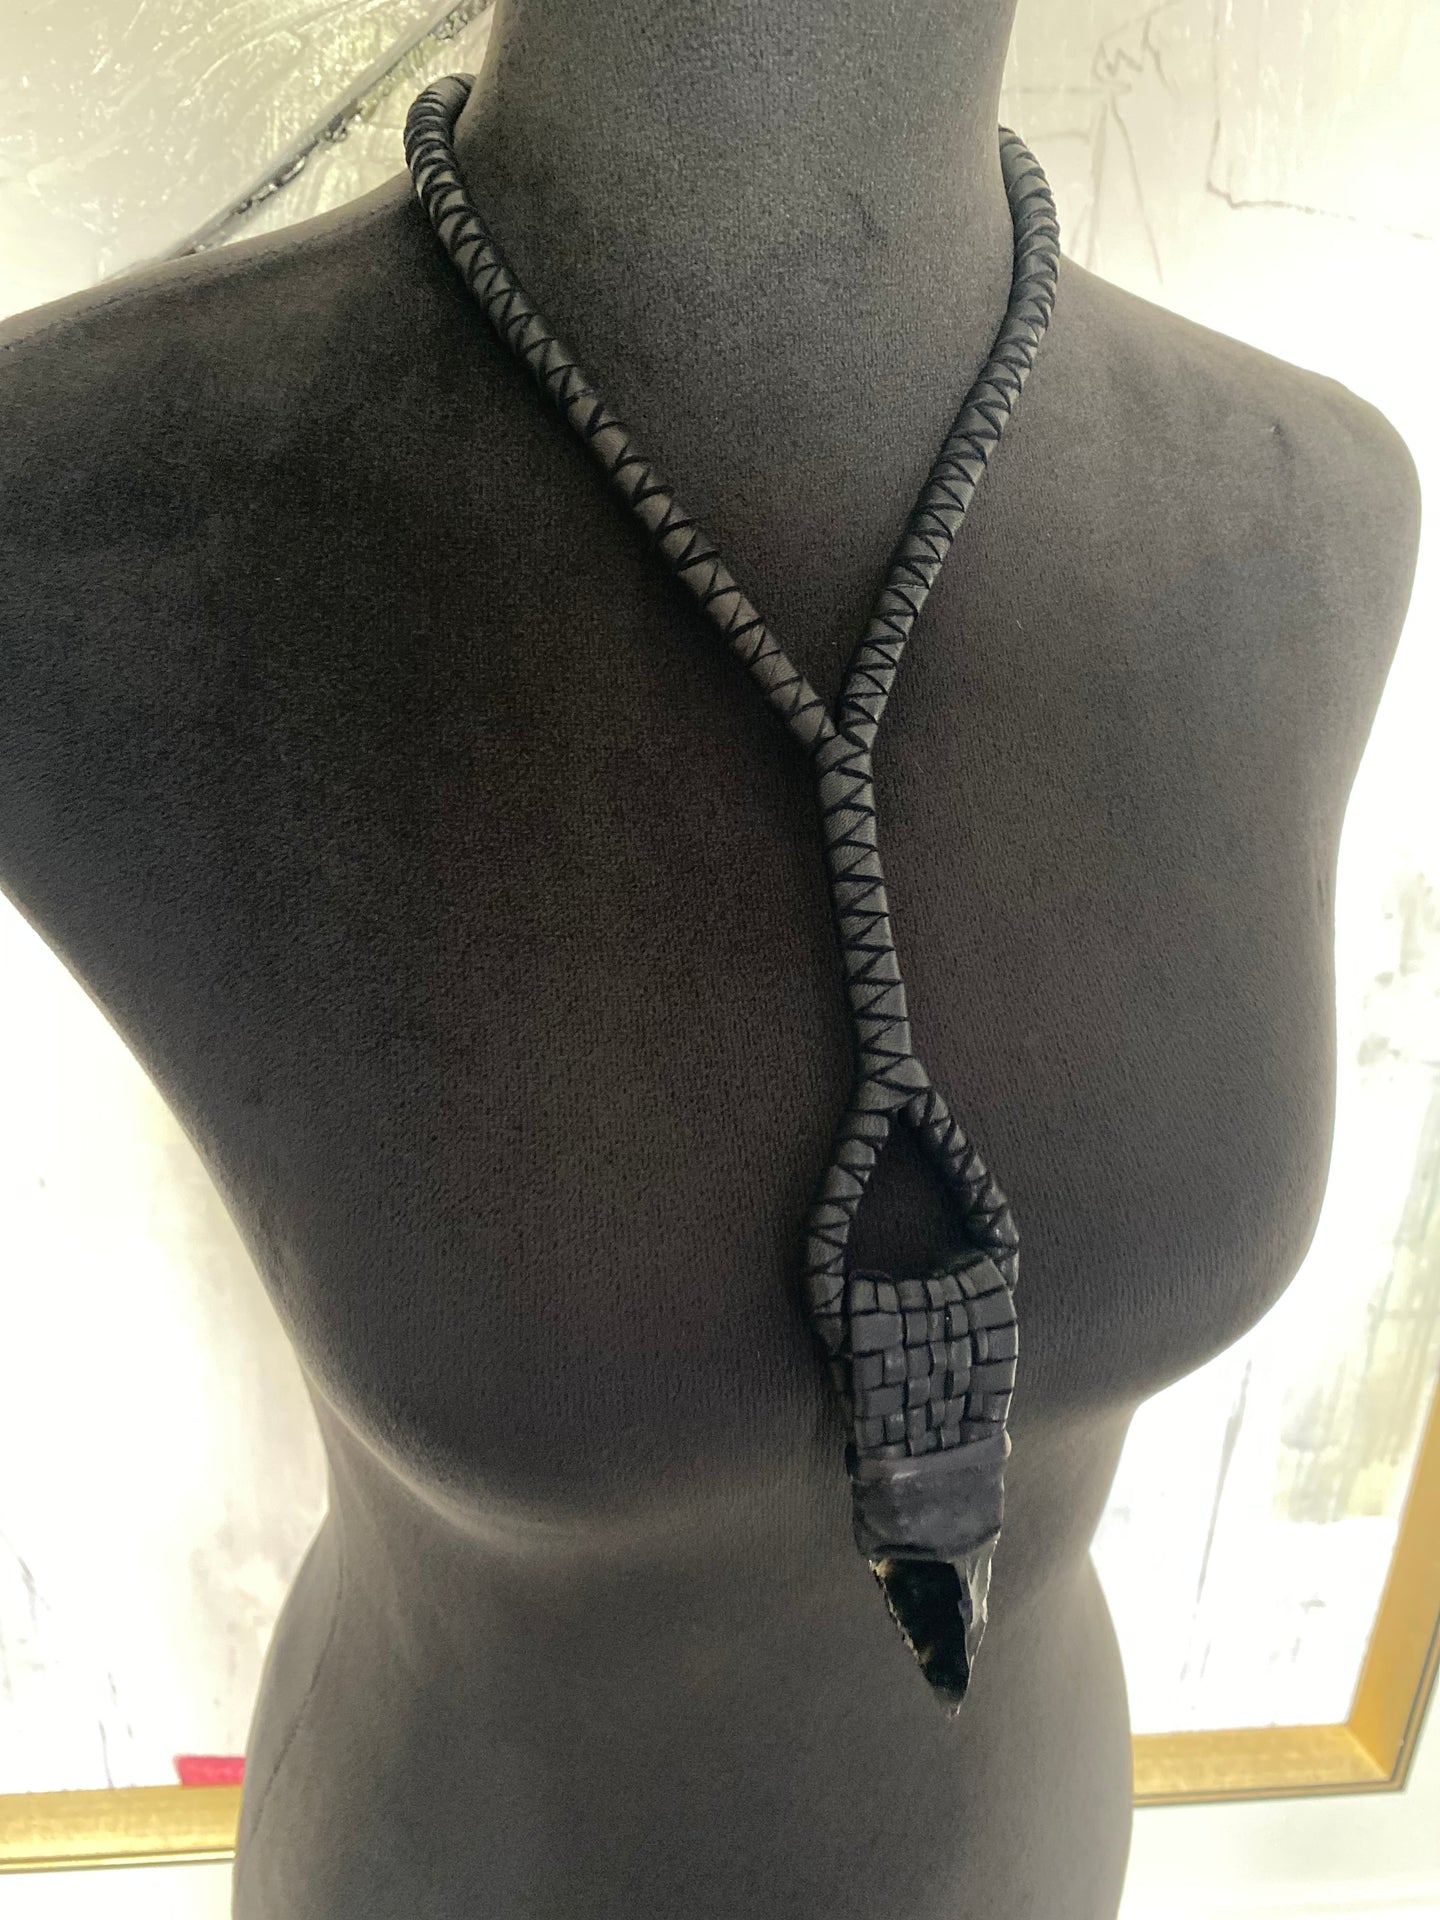 Black Leather & Obsidian Rope Necklace